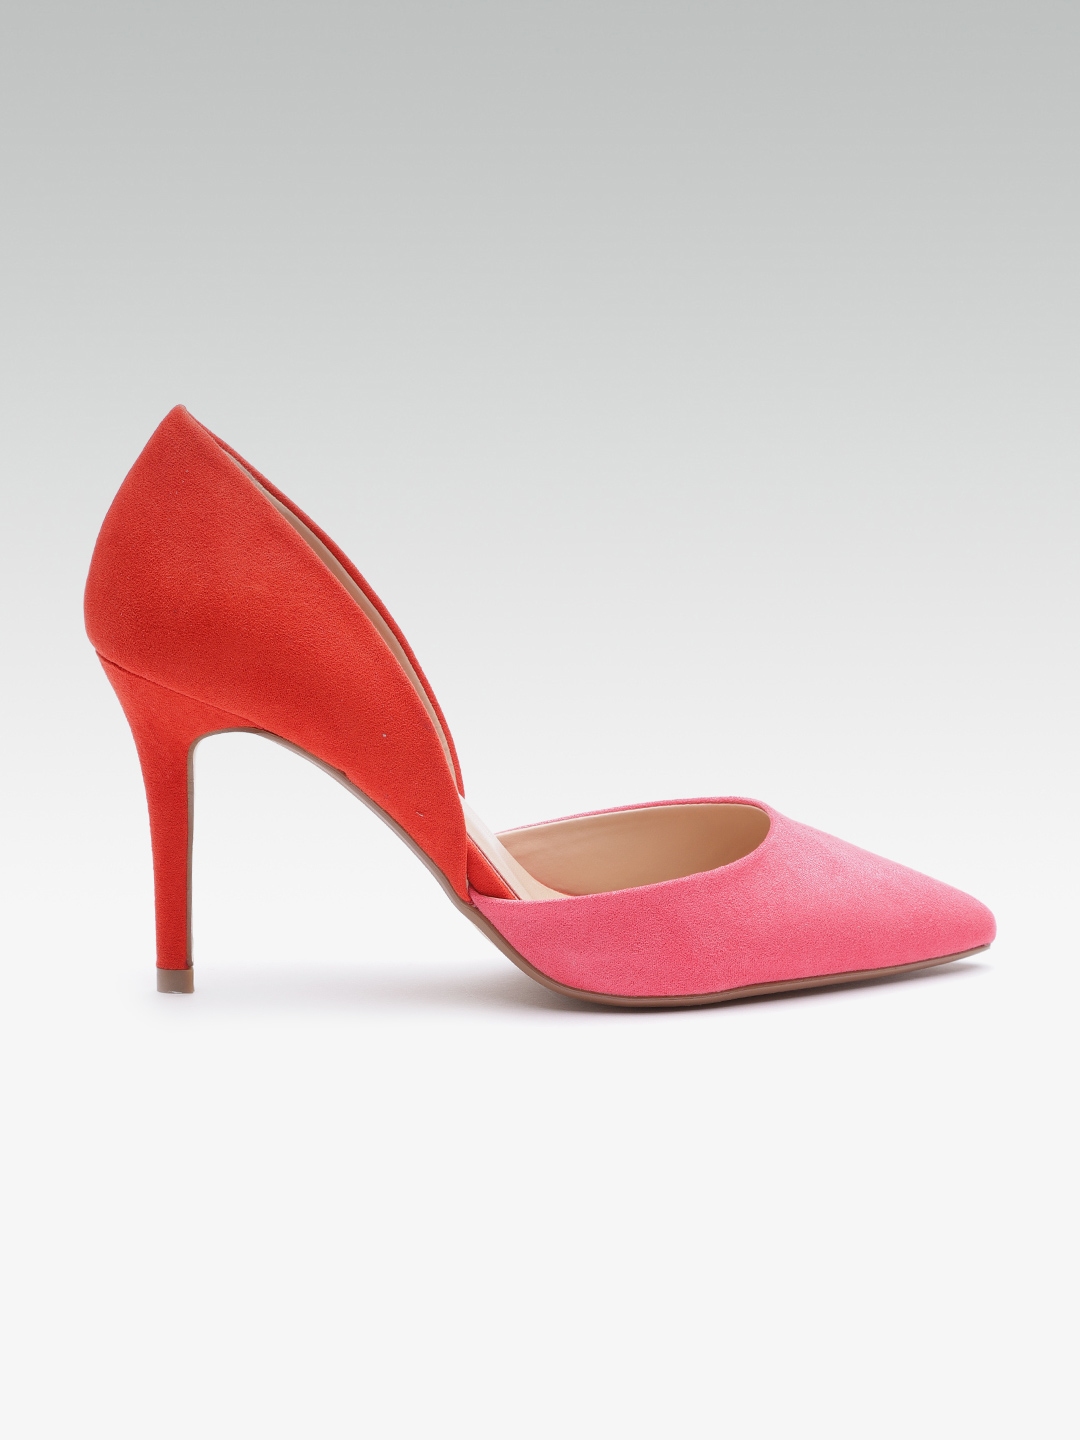 Buy Dorothy Perkins Women Pink And Red Colourblocked Pumps Heels For Women 6816403 Myntra 7307